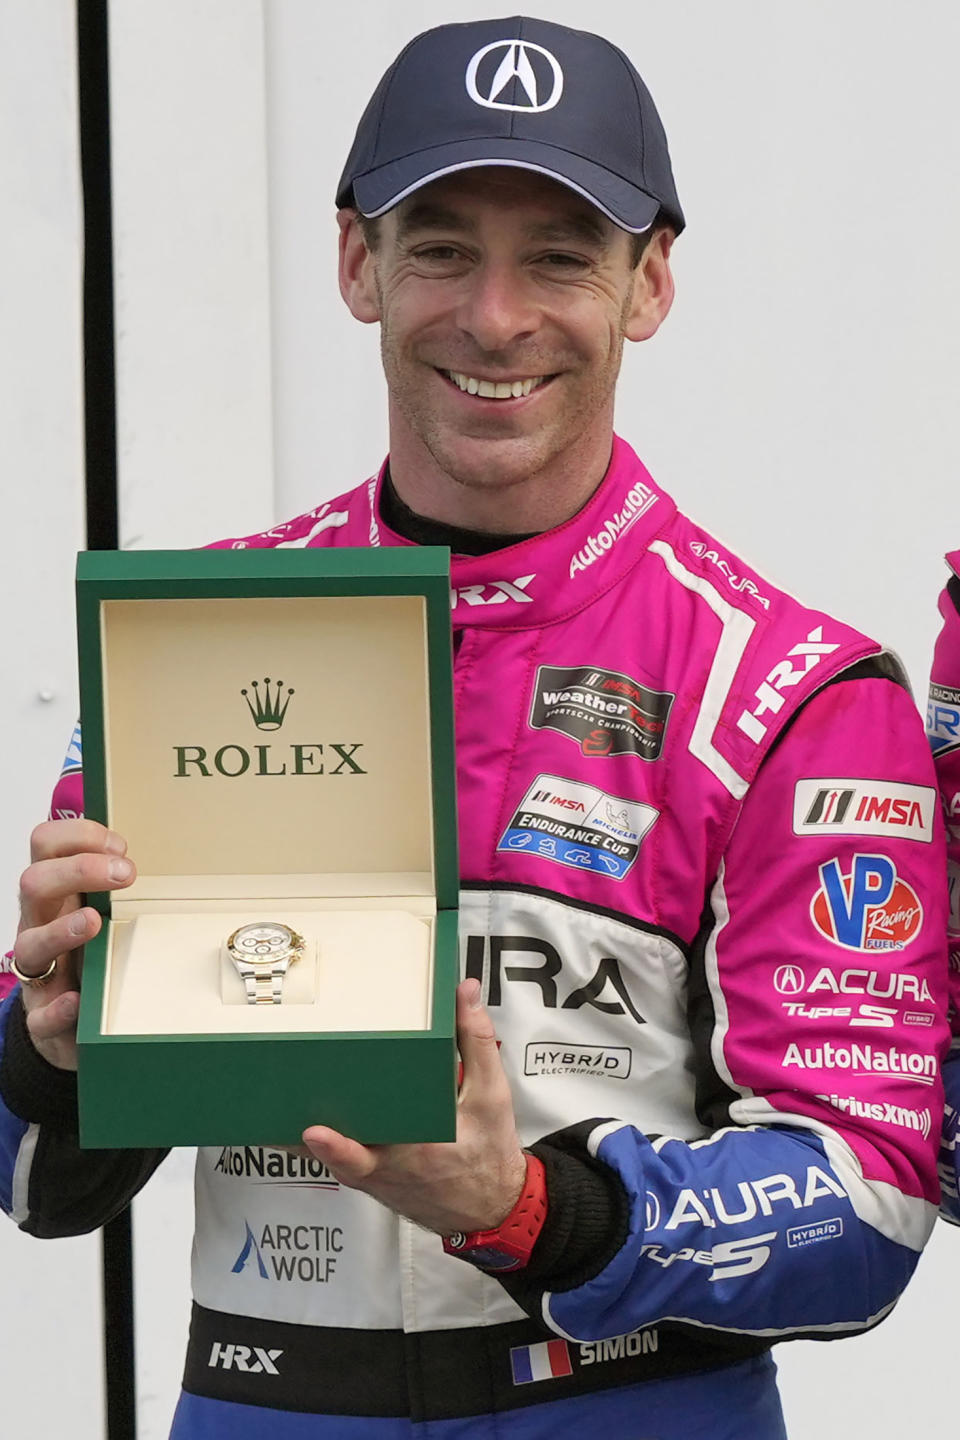 FILE - Simon Pagenaud shows off his Rolex watch in Victory Lane after the Rolex 24 Hour race at Daytona International Speedway, Sunday, Jan. 29, 2023, in Daytona Beach, Fla. Simon Pagenaud won back-to-back Rolex watches driving for a team that isn't at Daytona International Speedway to defend its two titles in the prestigious endurance race. But Pagenaud could not have driven anyway: the Frenchman is still recovering from injuries suffered in a July crash during IndyCar practice. (AP Photo/John Raoux, File)